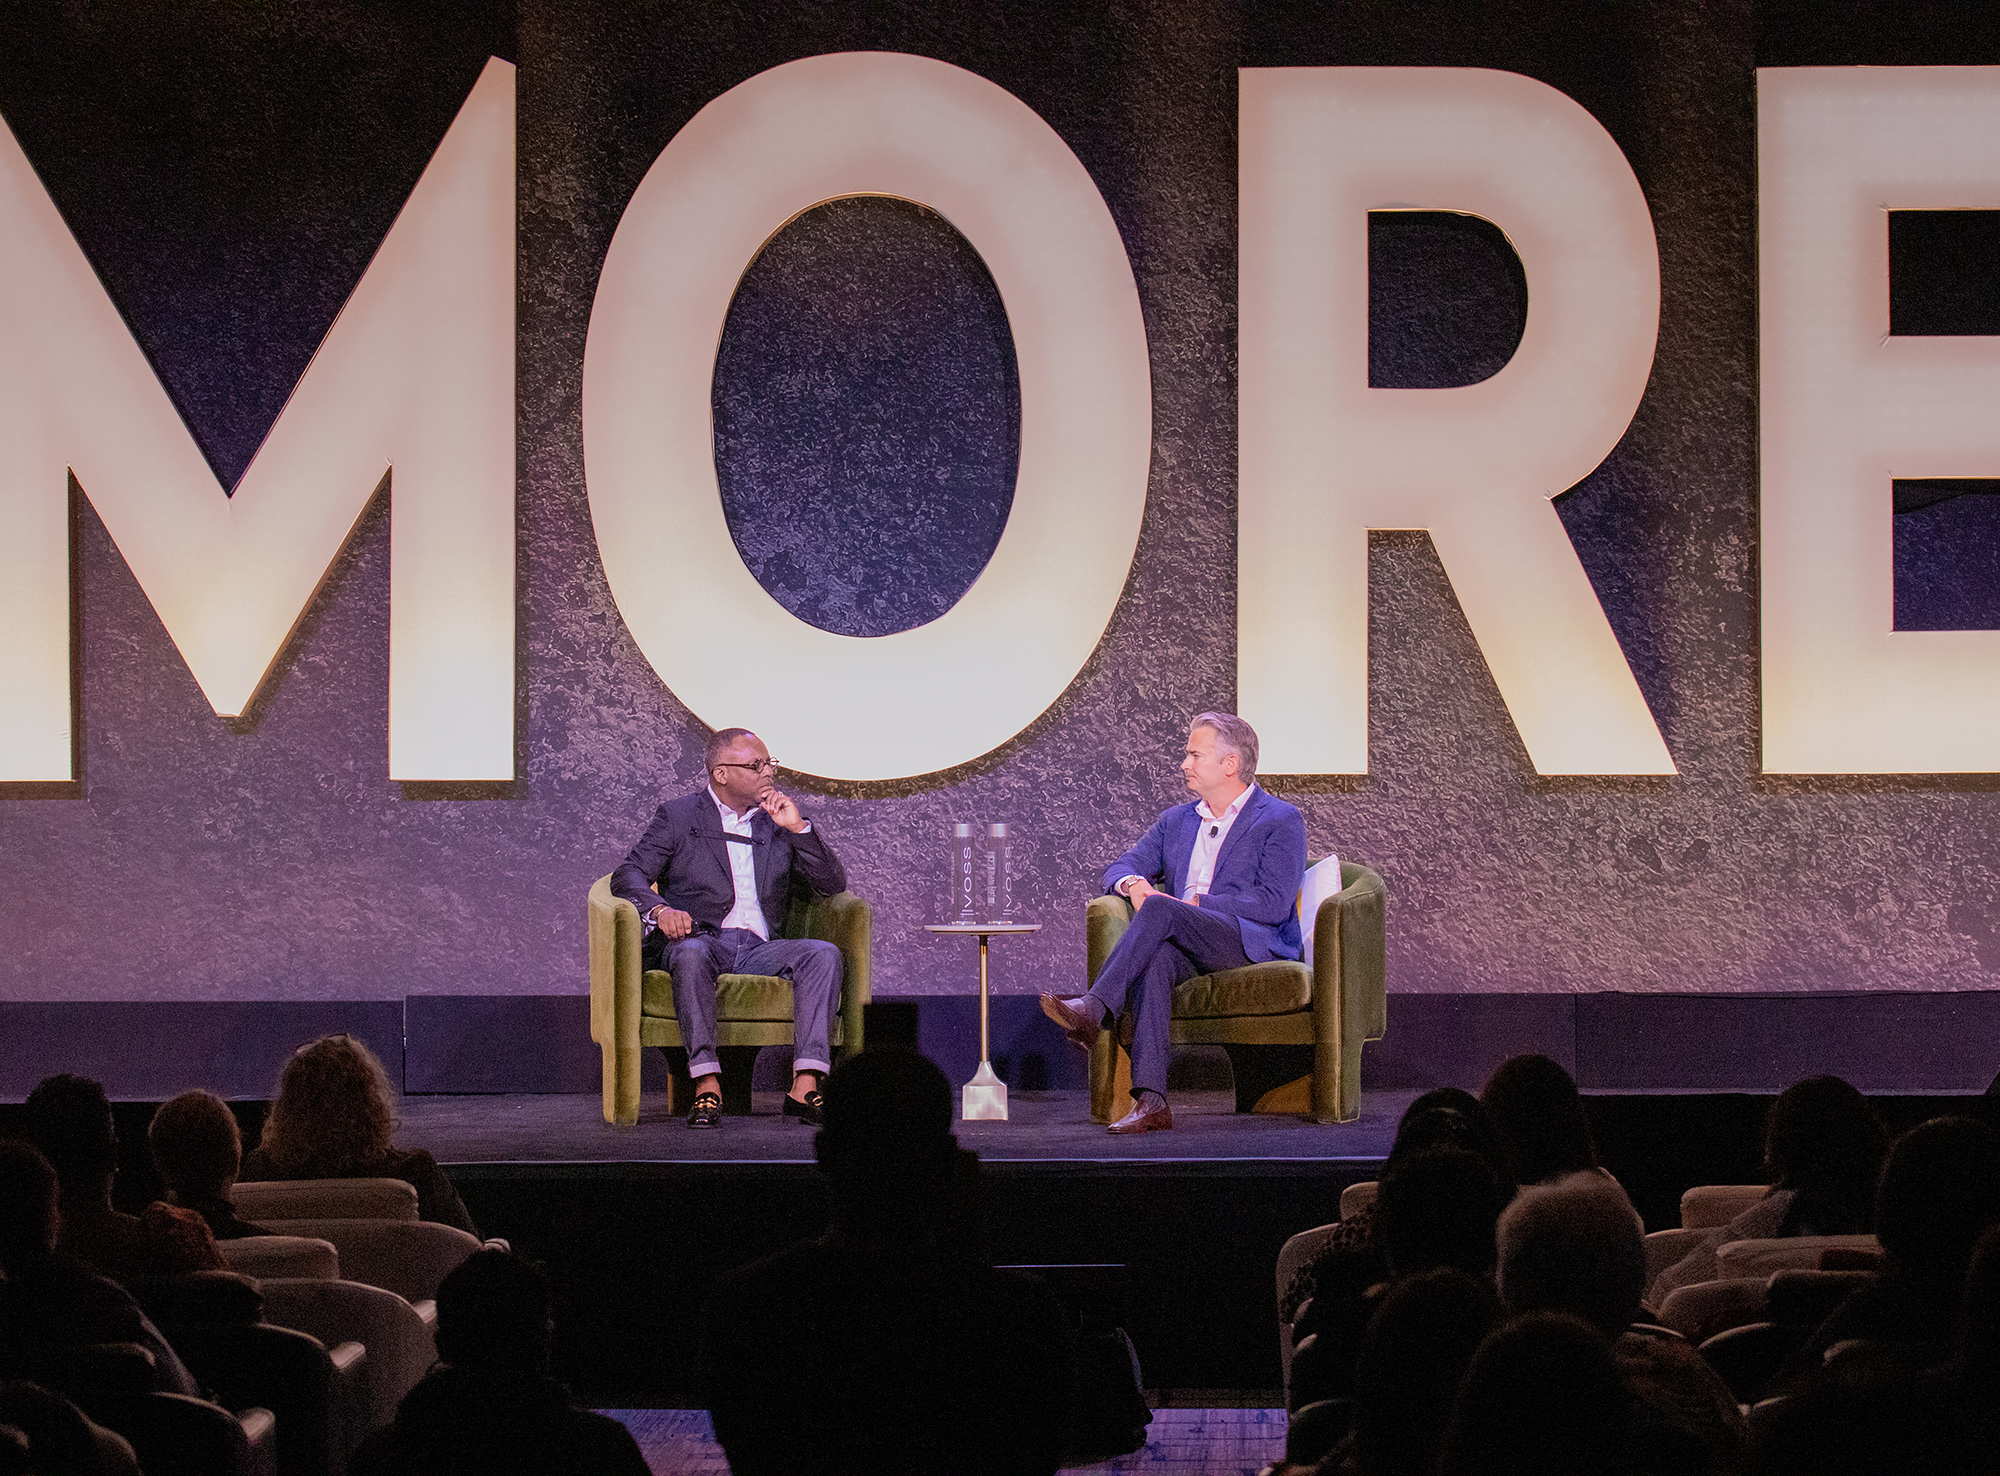 Synchrony’s Chief Diversity, Inclusion and Corporate Responsibility Officer Michael Matthews (left) and Synchrony CEO Brian Doubles (right) highlighted the company’s progress in advancing equity at its 2023 Global Diversity Experience. This year’s theme highlighted the need to see, feel and do “more” to drive meaningful and lasting change. (Photo credit: TheWrightVision for Synchrony)